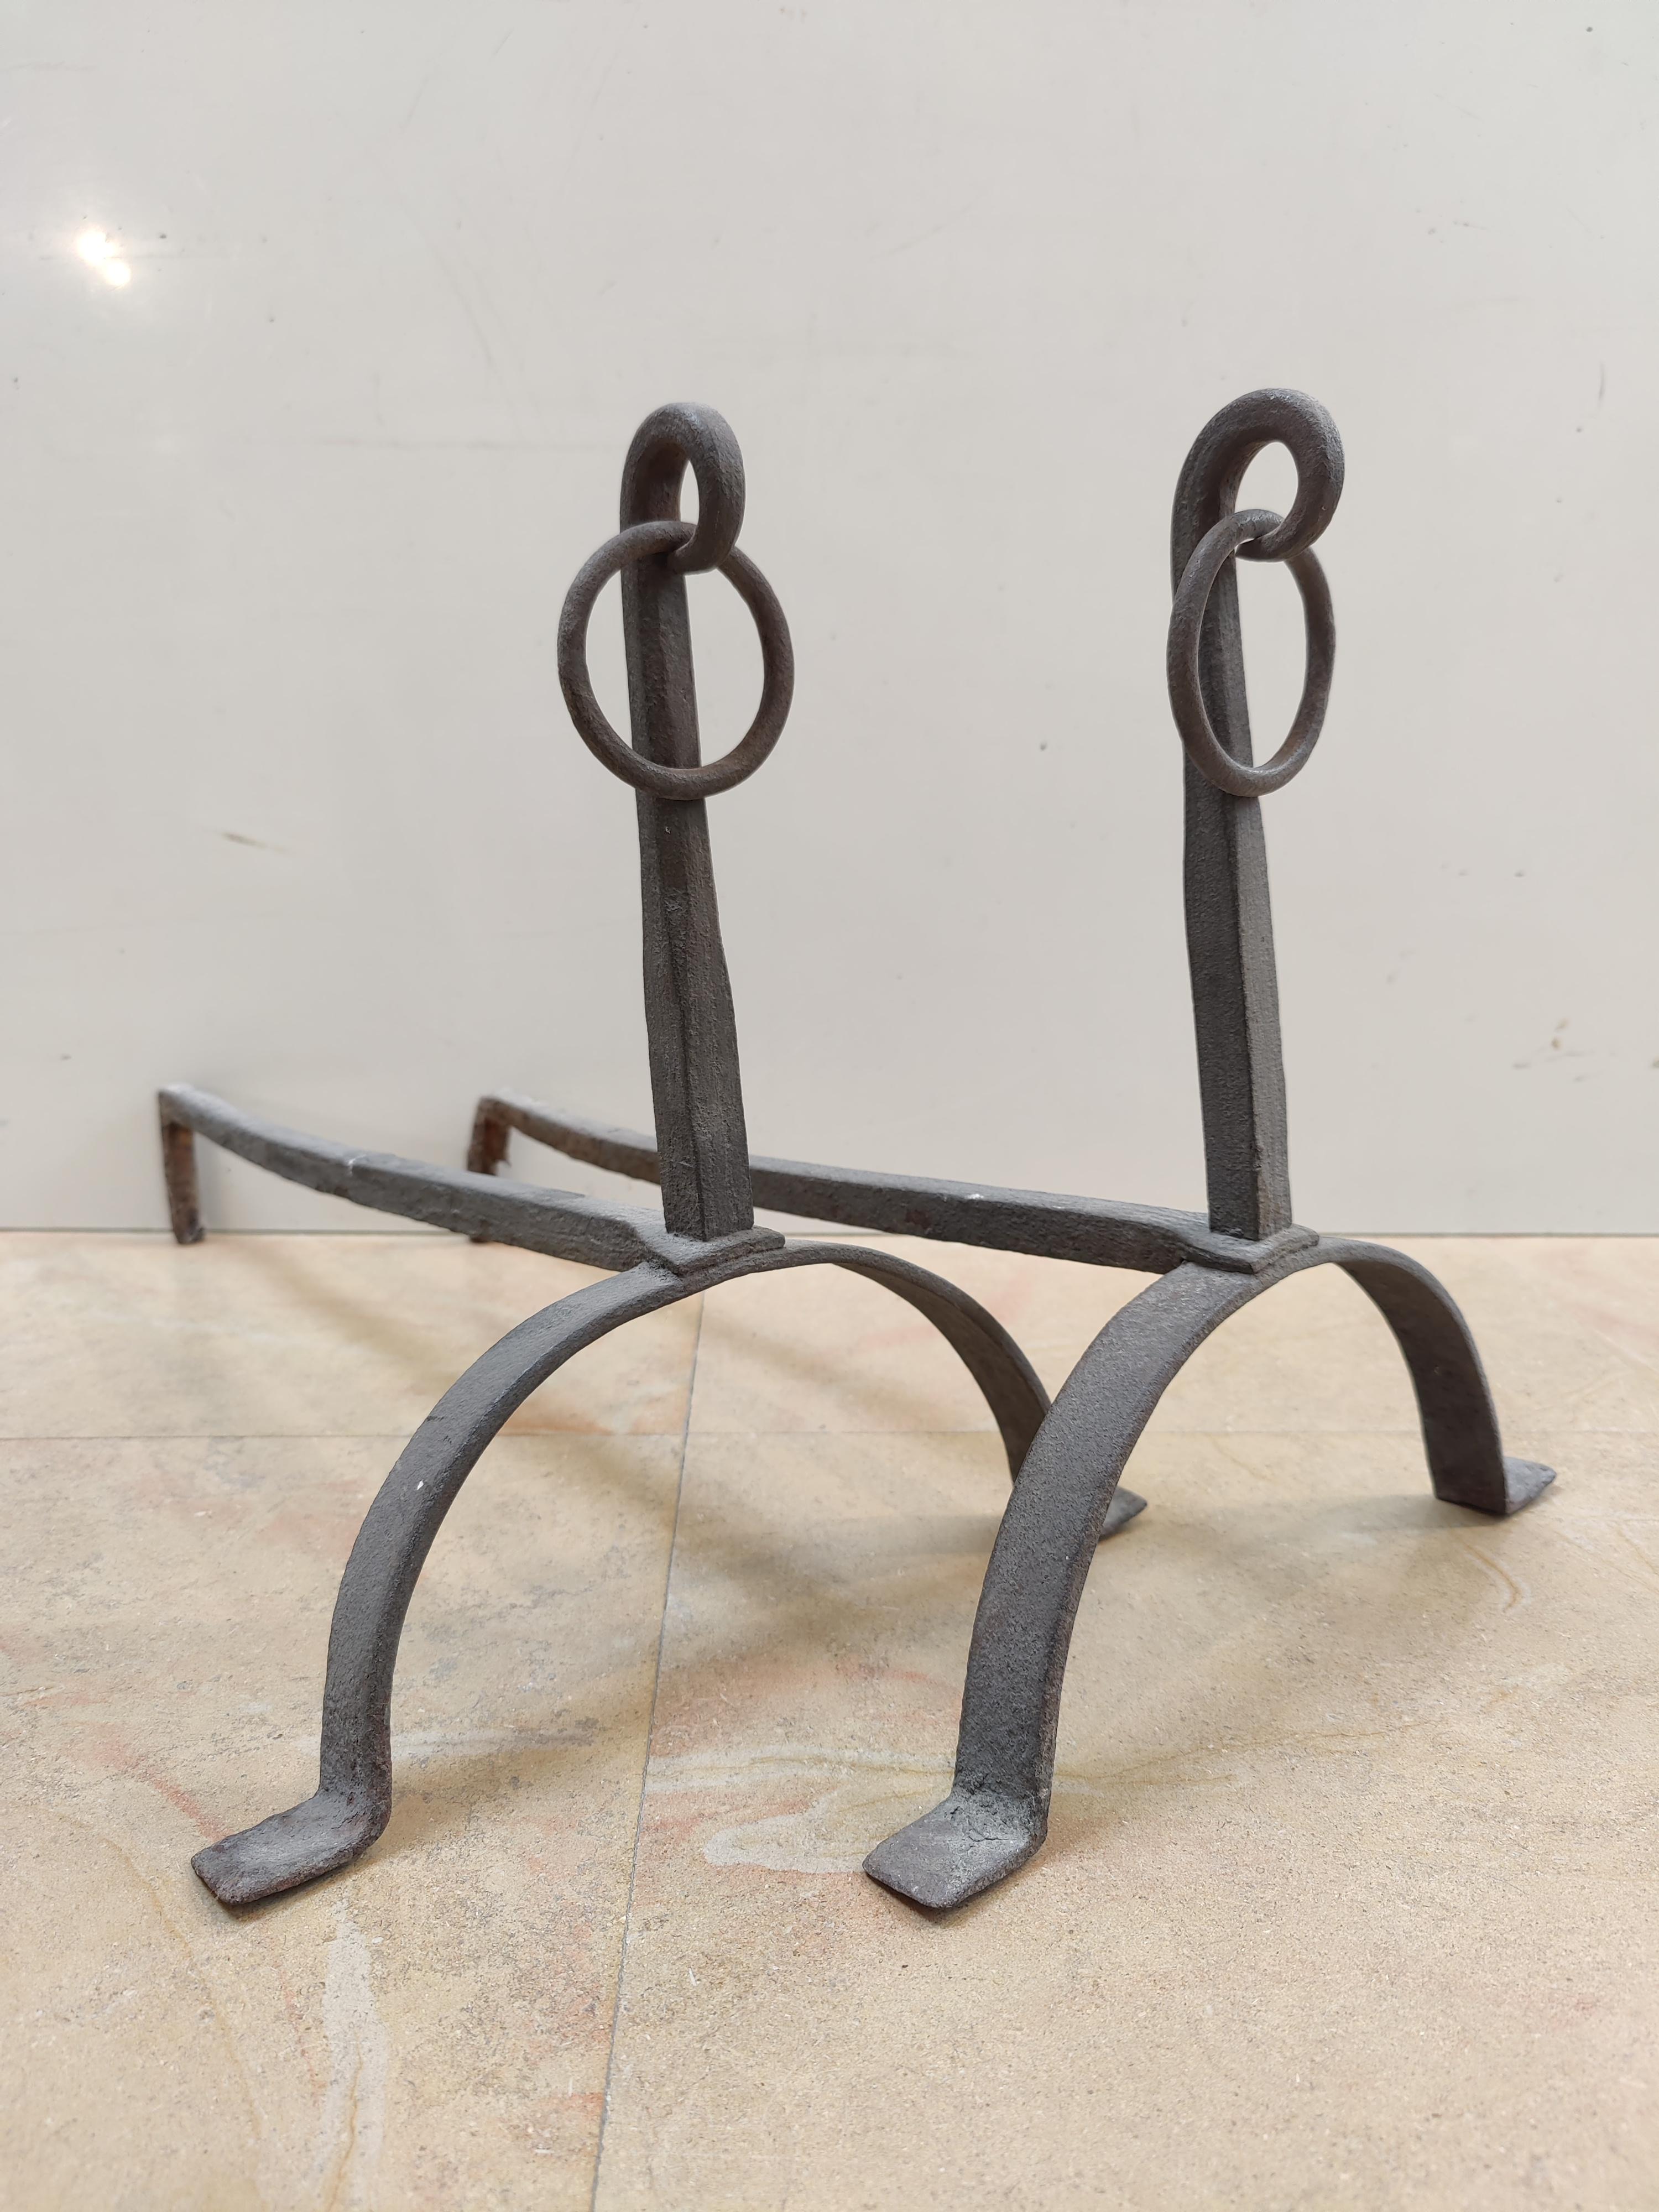 Beautiful wrought iron andirons.

Weight: 12 lbs / 5 kg.

Upon request they can be made black / pewter.

See all our antique fireplaces and fireplace accessories at 1stdibs by pressing the ‘View All From Seller’ button.